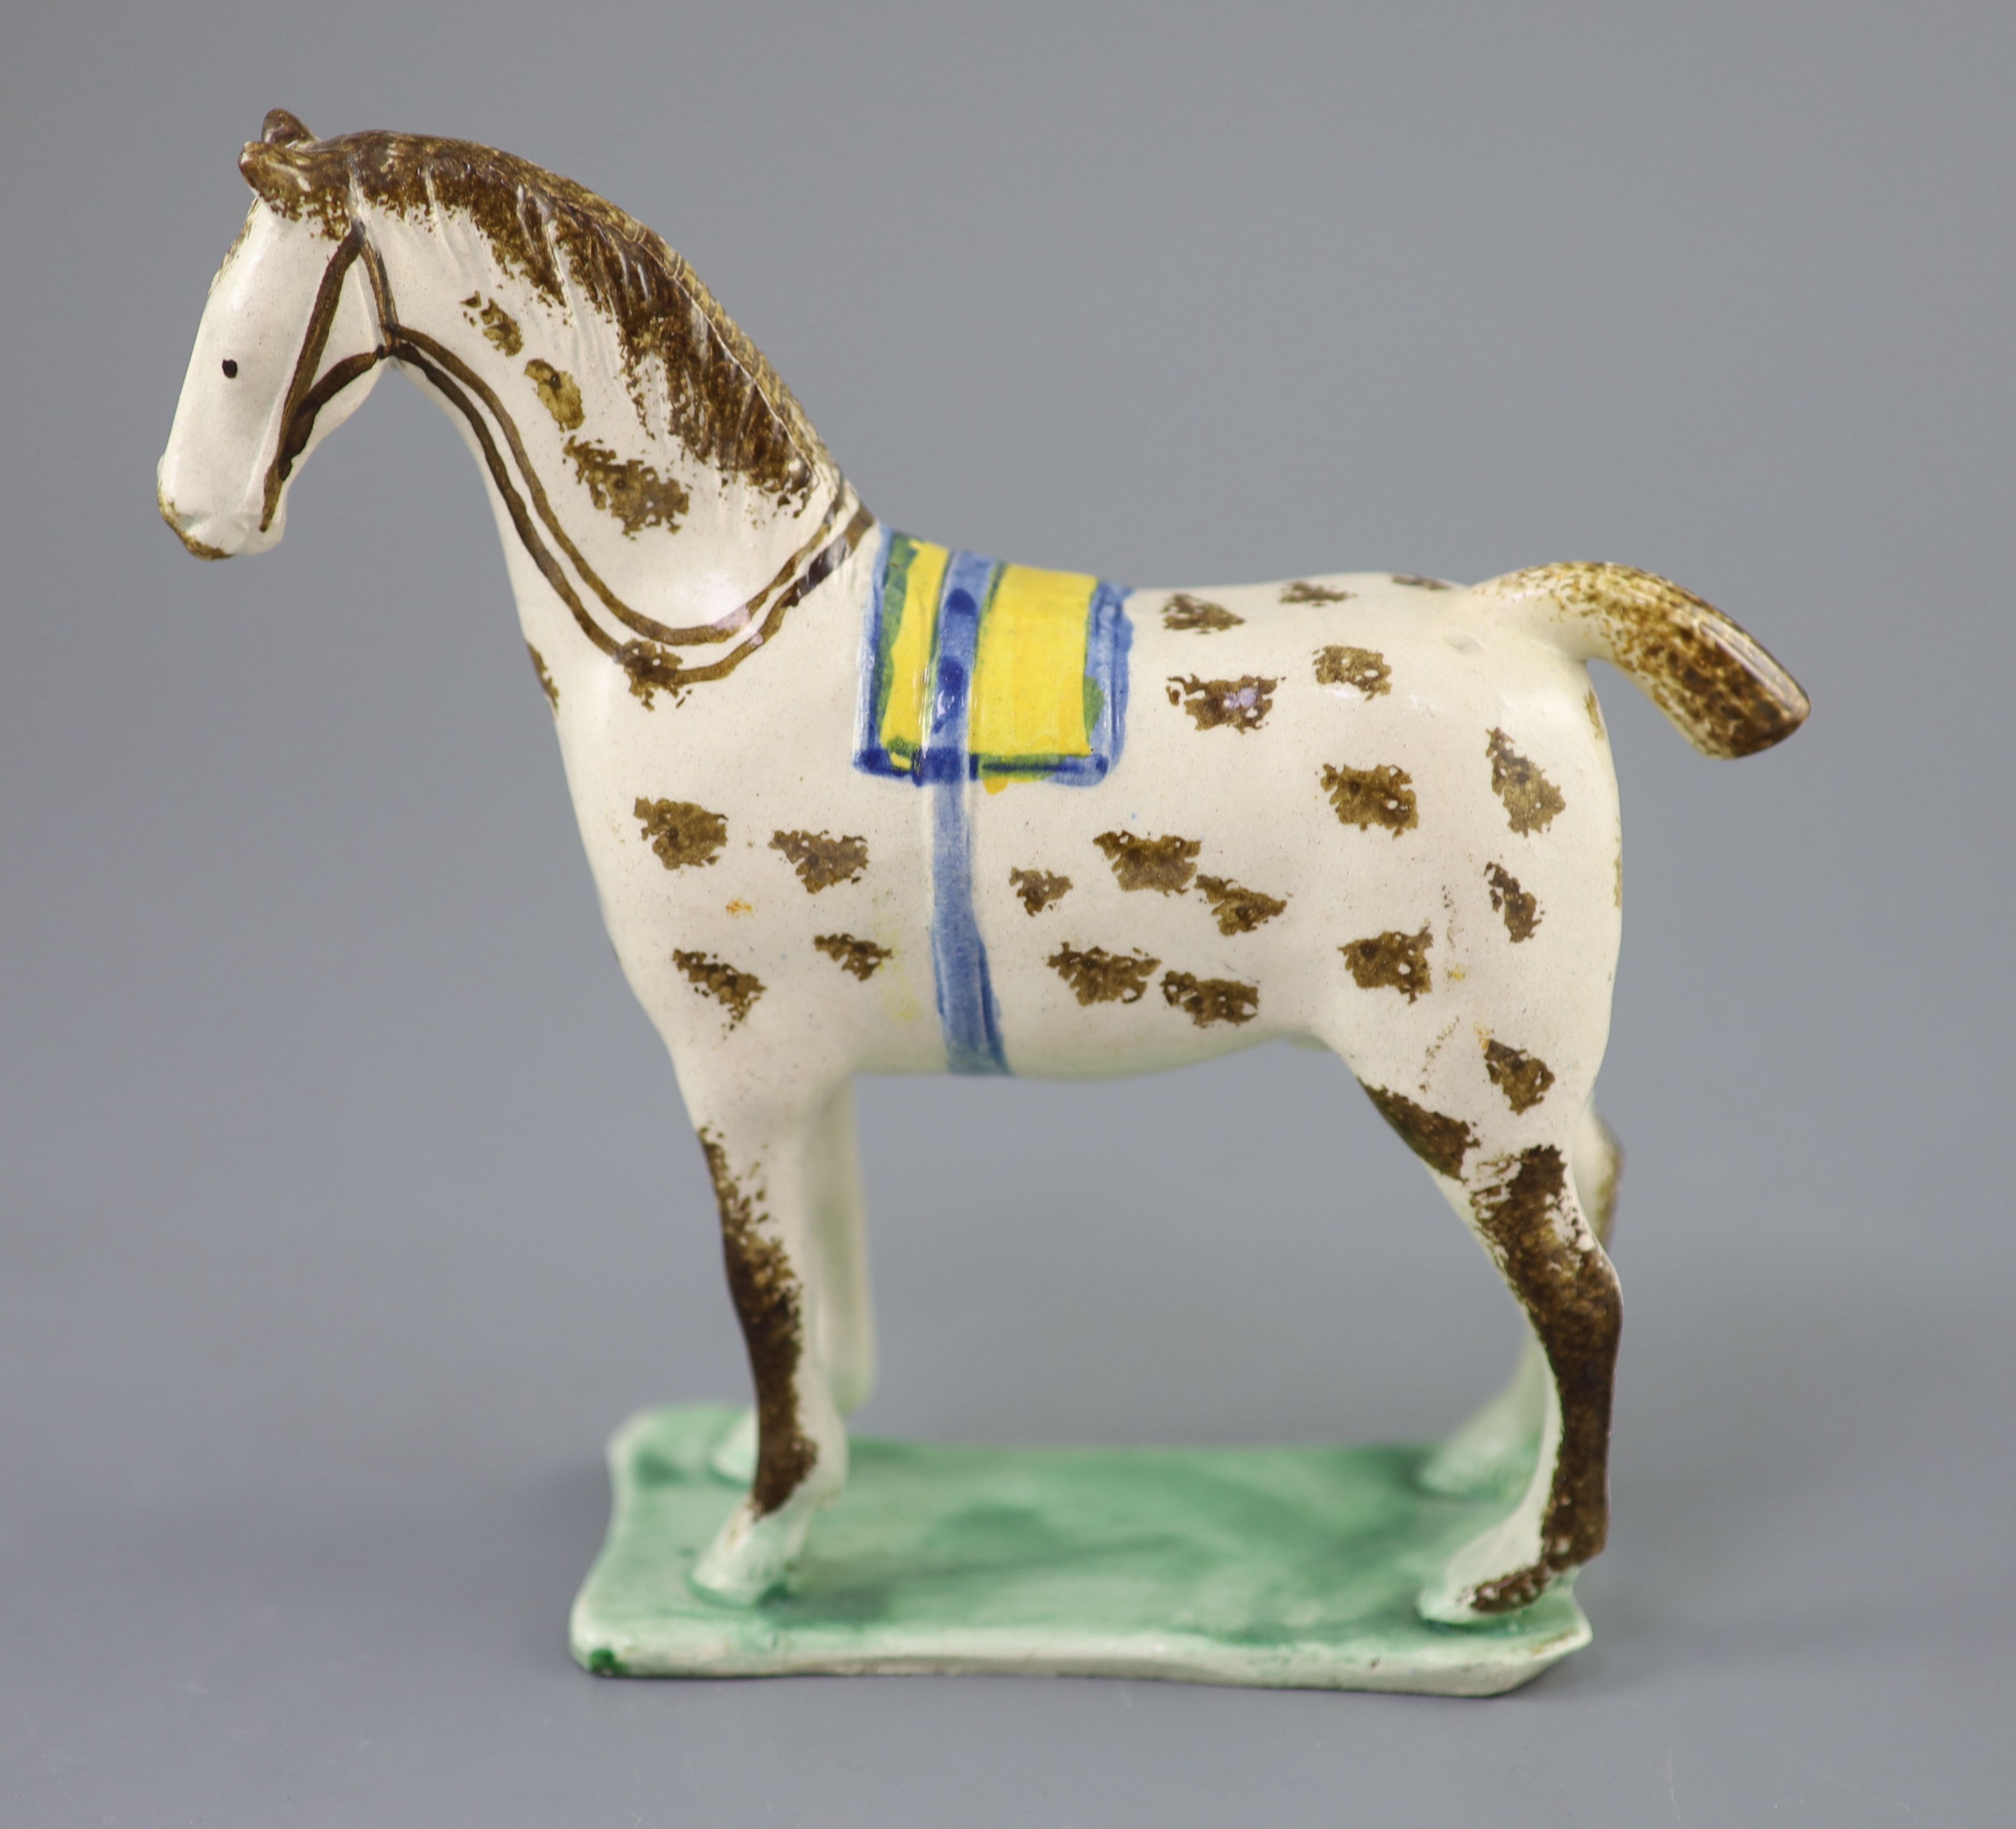 Attributed to St. Anthony Pottery, Newcastle, a pearlware figure of a racehorse with yellow saddle, c.1800-20, 15cm high